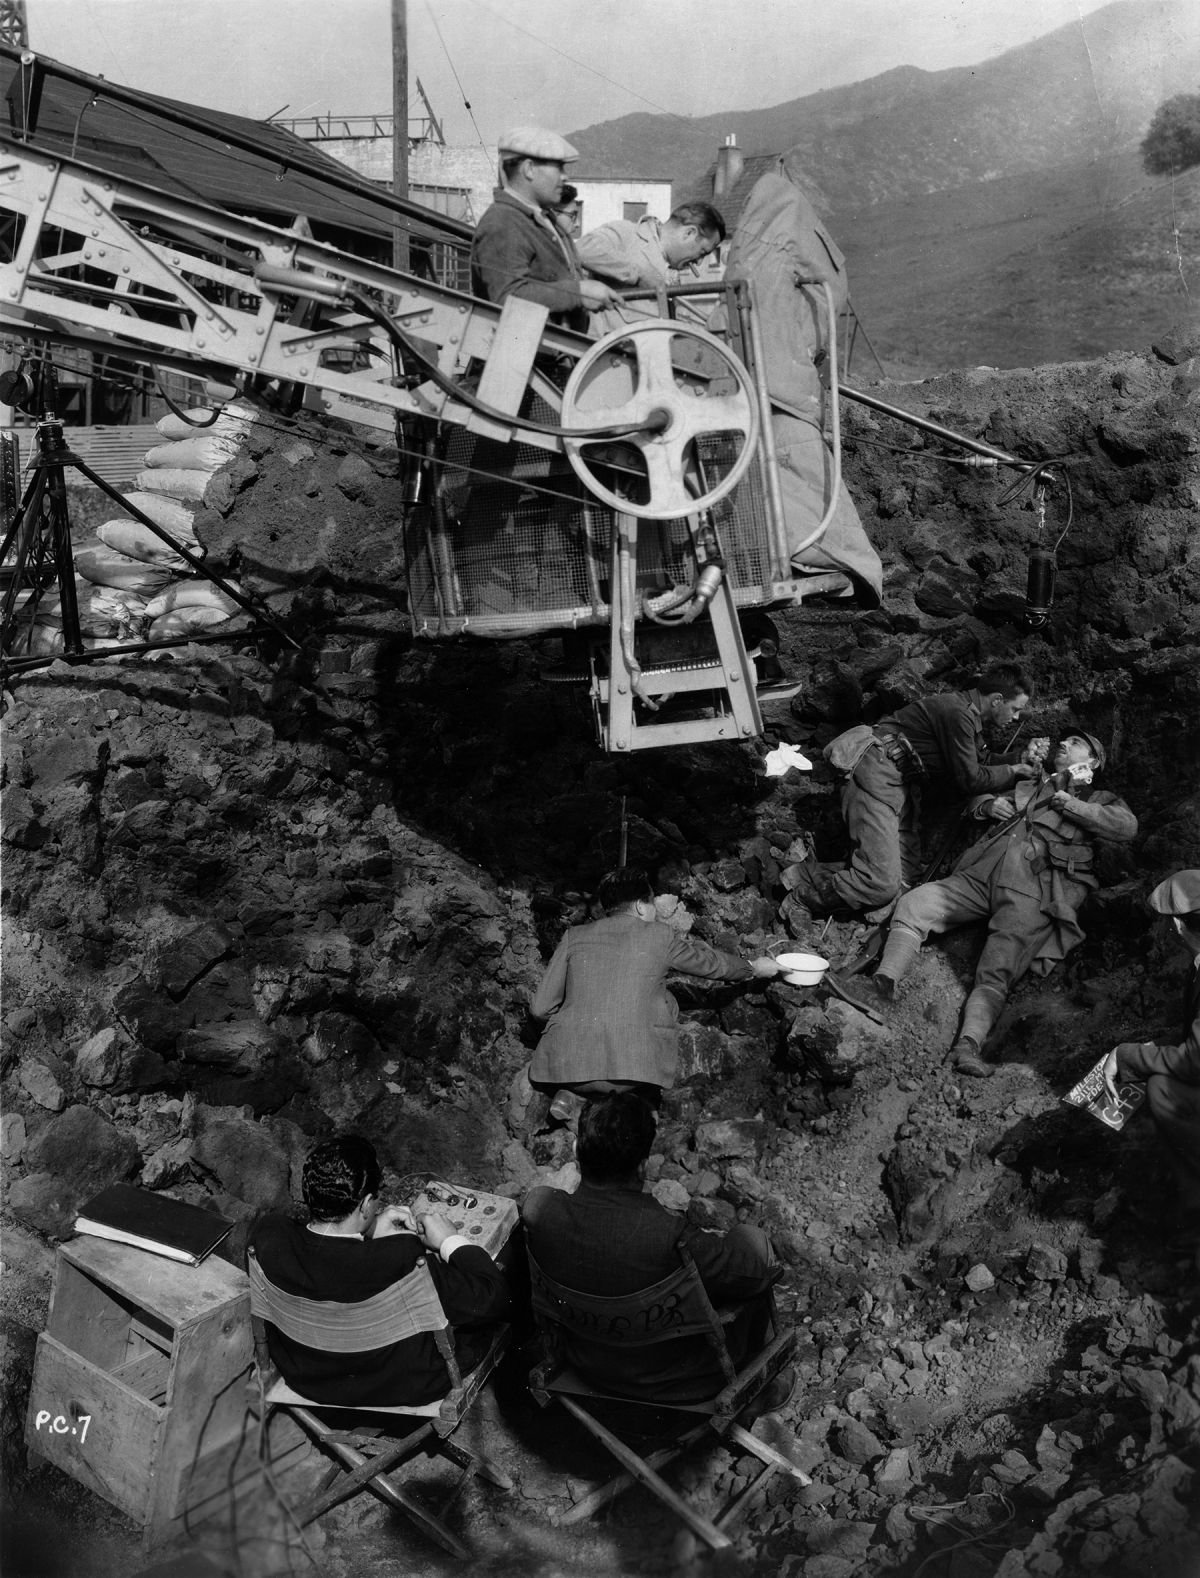 Angling in on a crane, Arthur Edeson, ASC behind the camera.